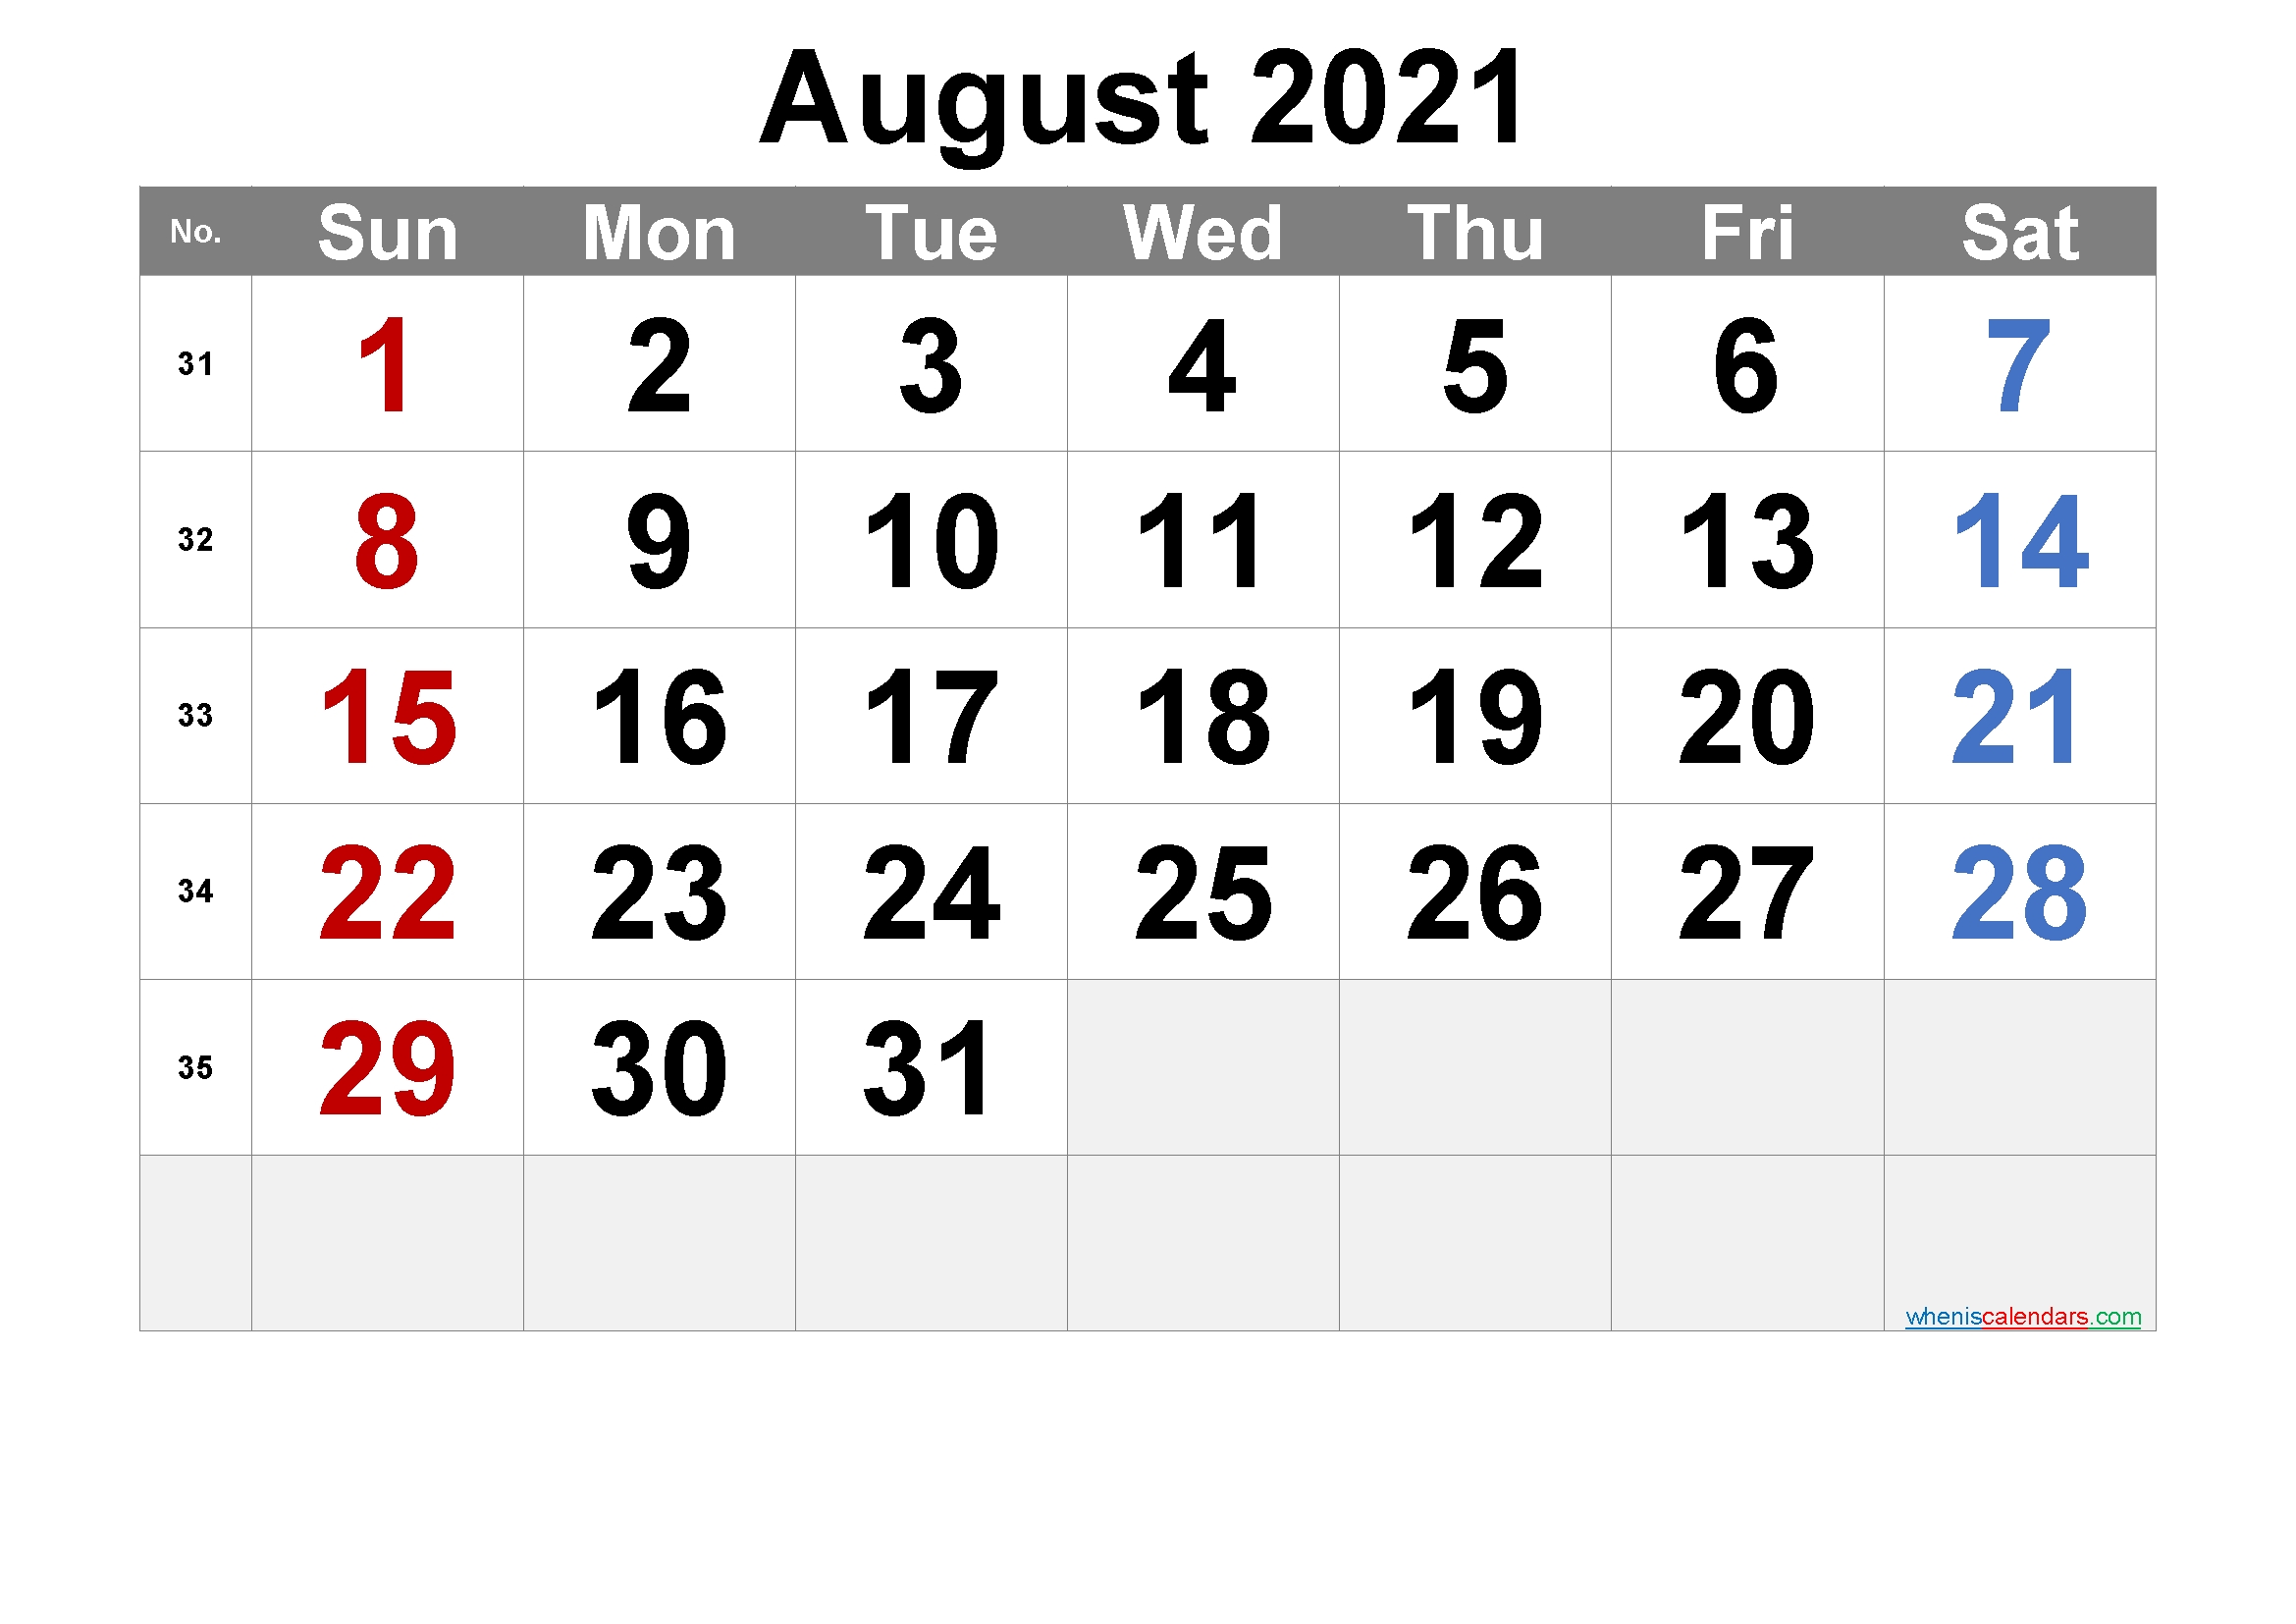 August 2021 Printable Calendar With Holidays | Free Printable 2020 Monthly Calendar With Holidays August 2021 Calendar Month